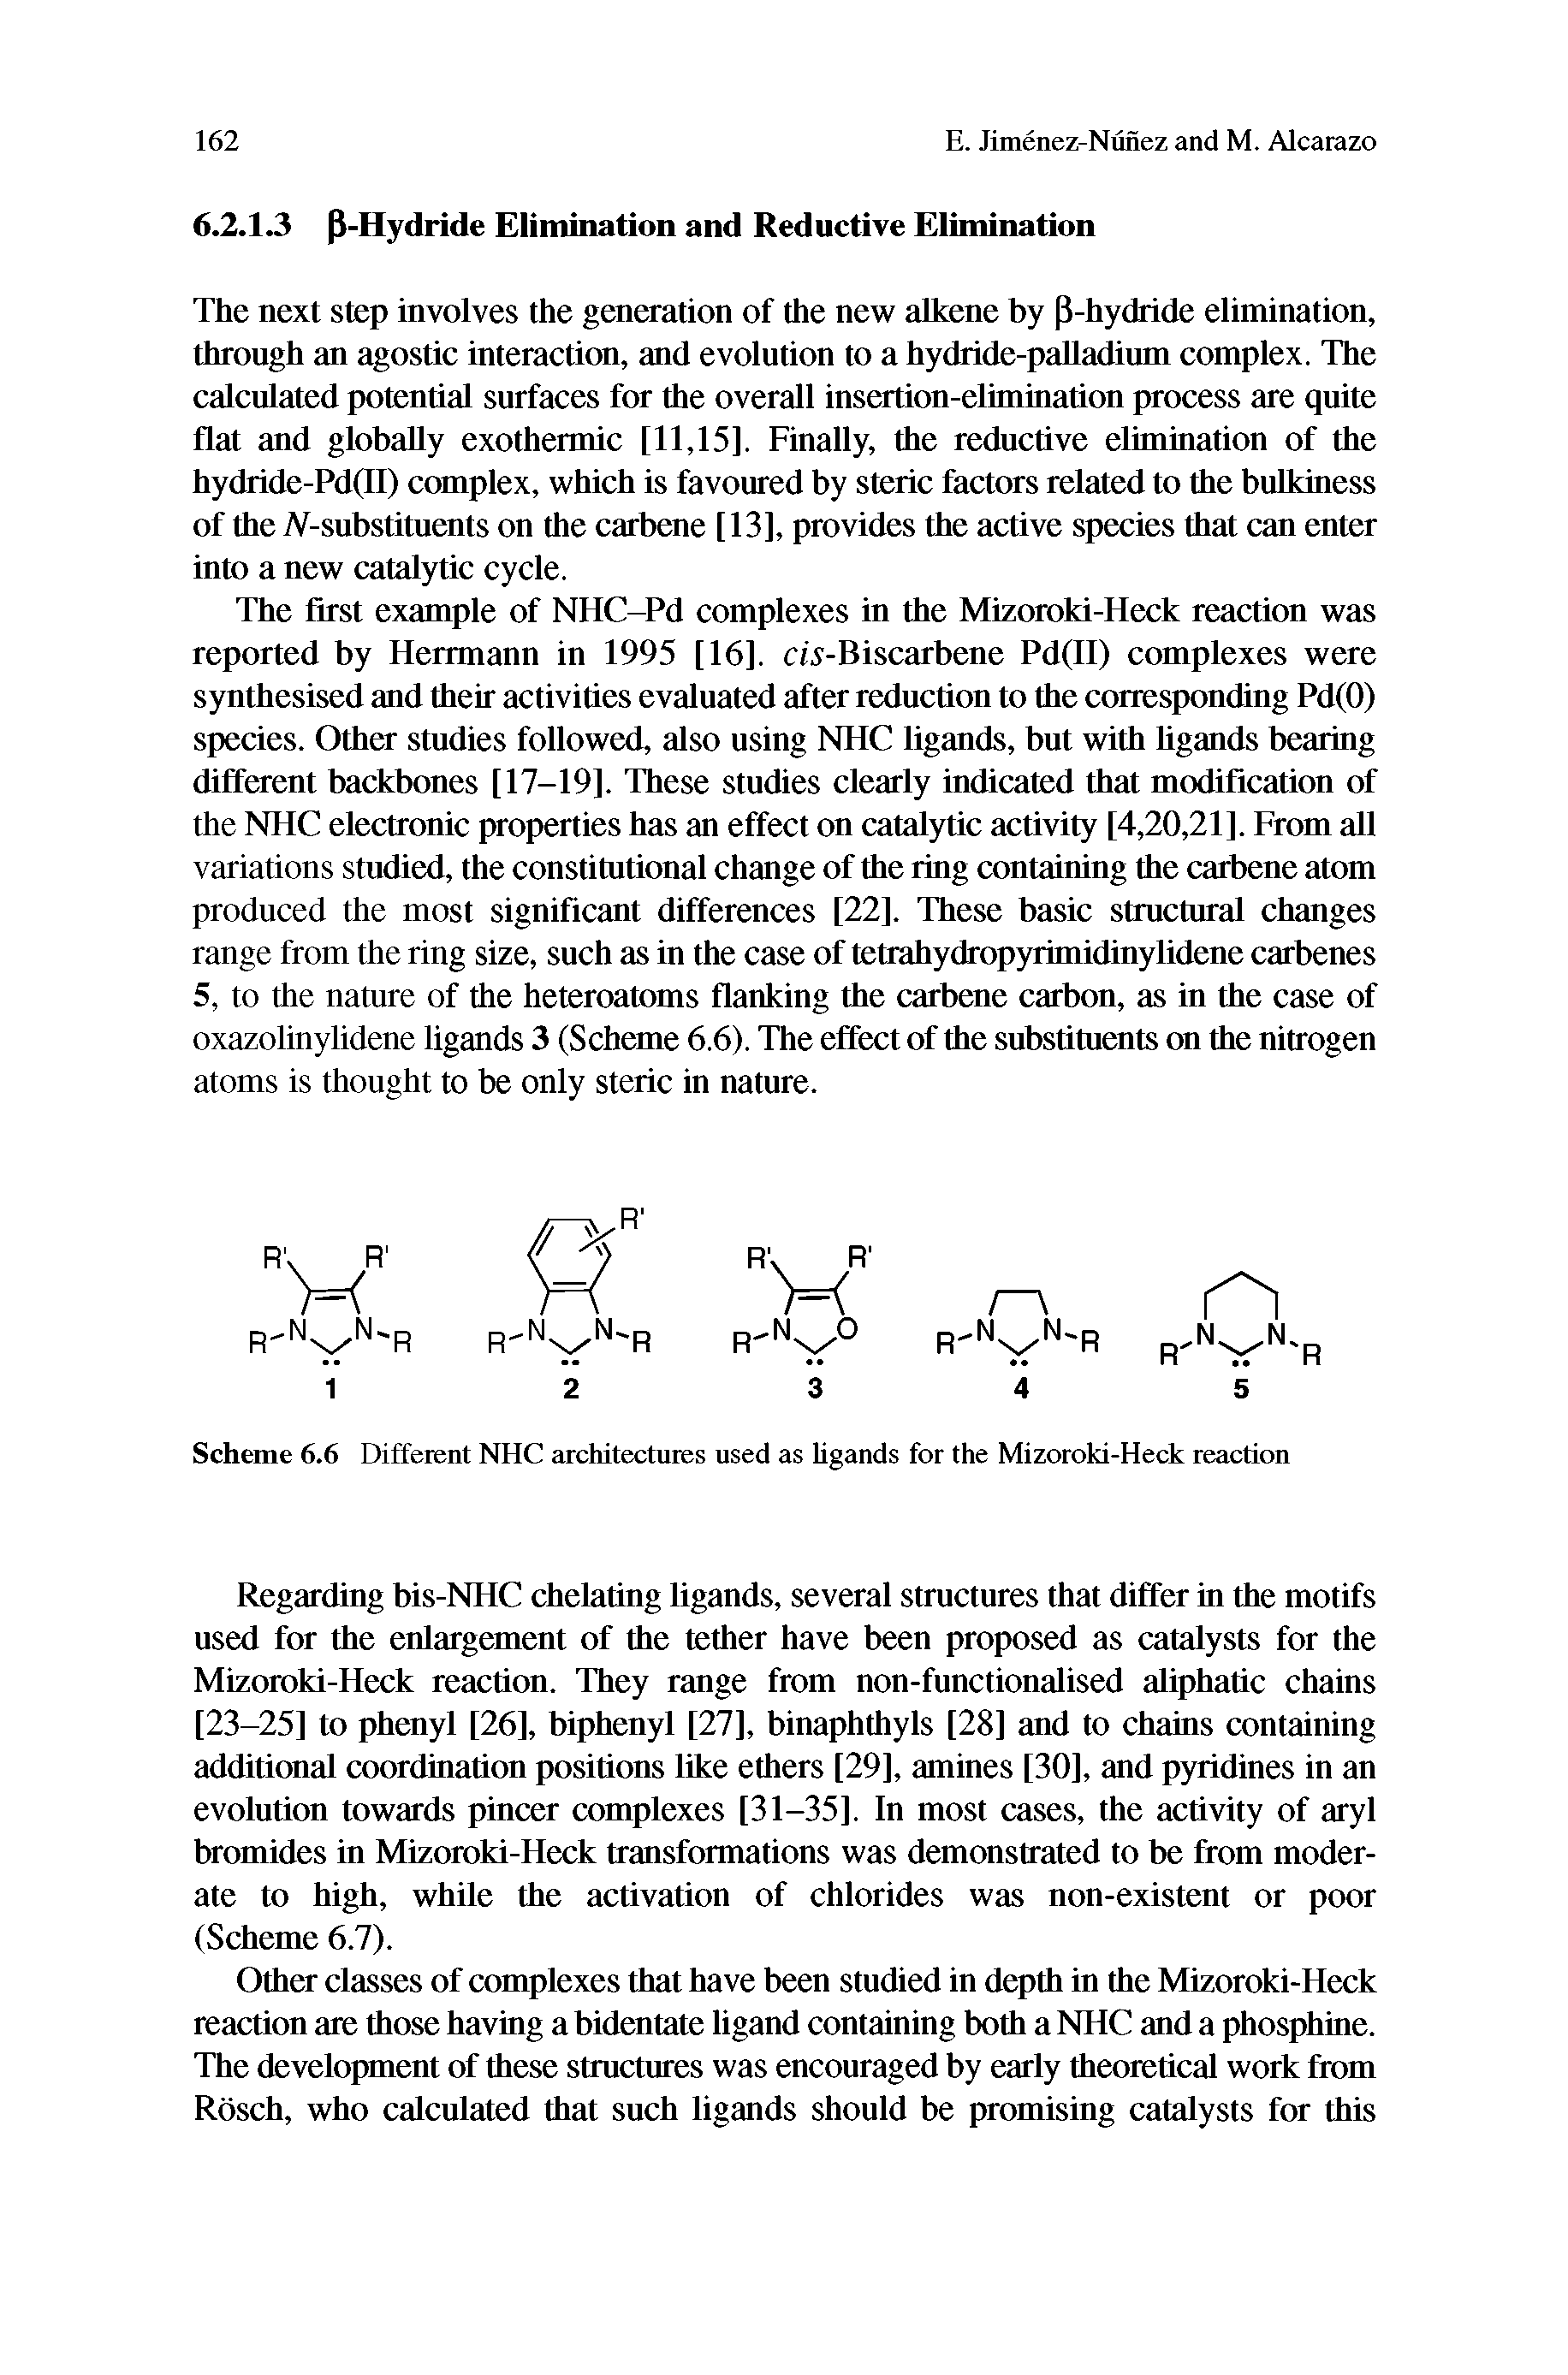 Scheme 6.6 Different NHC architectures used as hgands for the Mizoroki-Heck reaction...